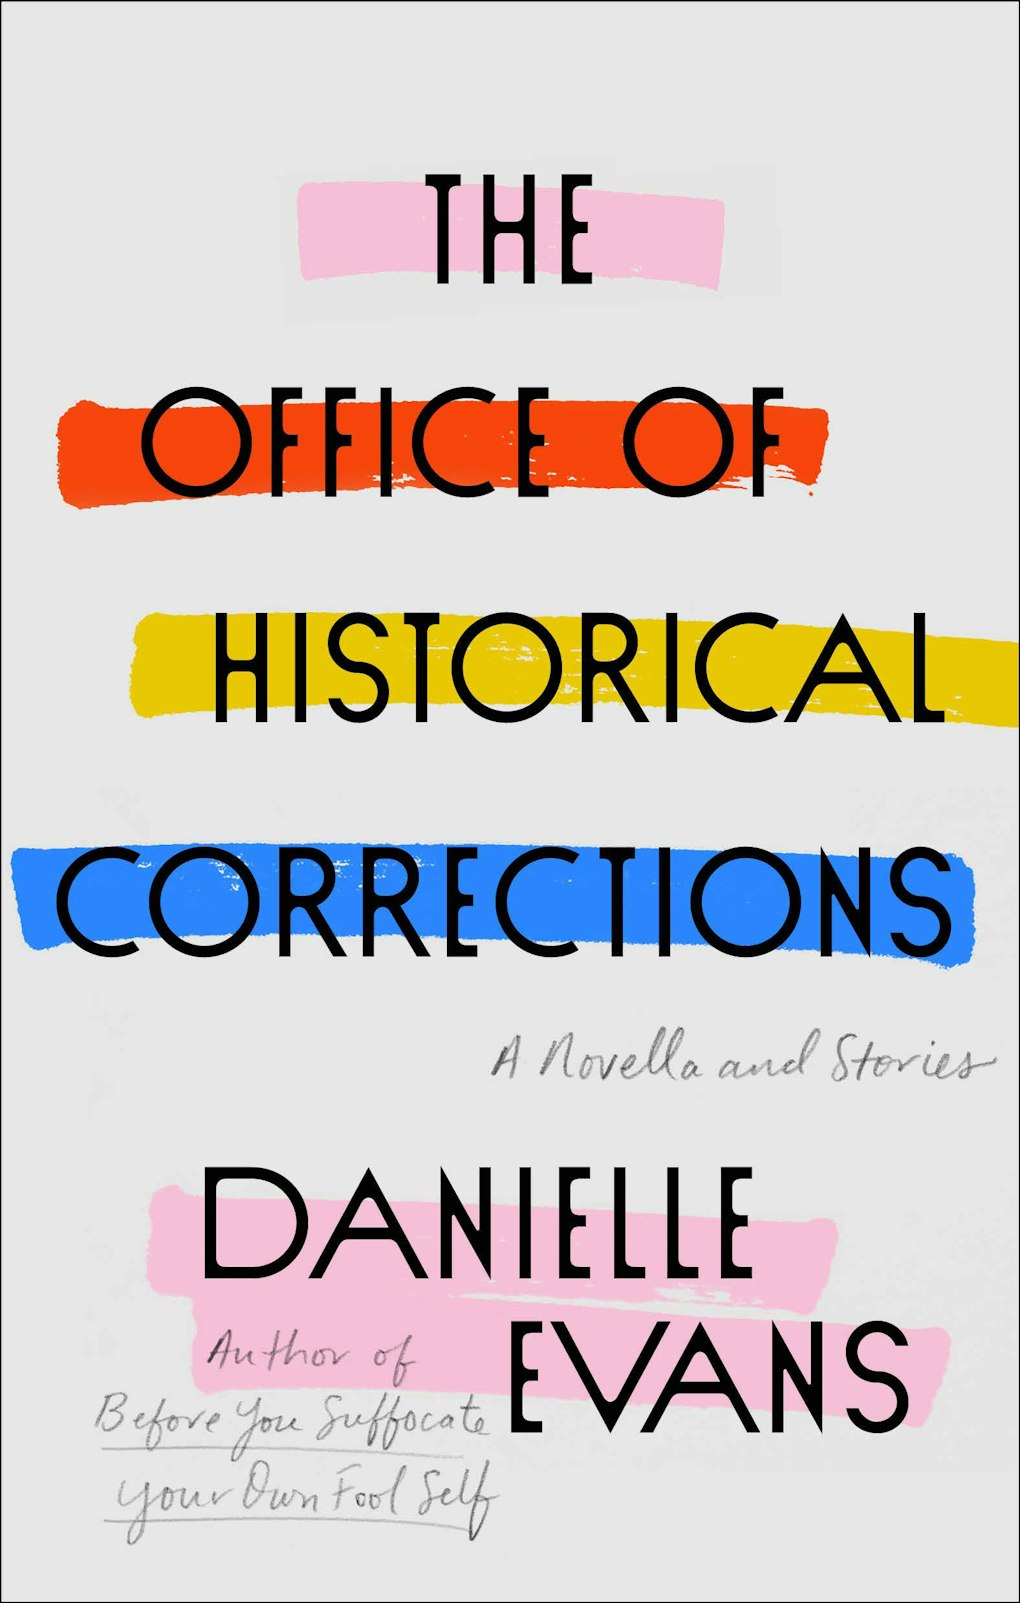 Danielle Evans's The Office of Historical Corrections – The